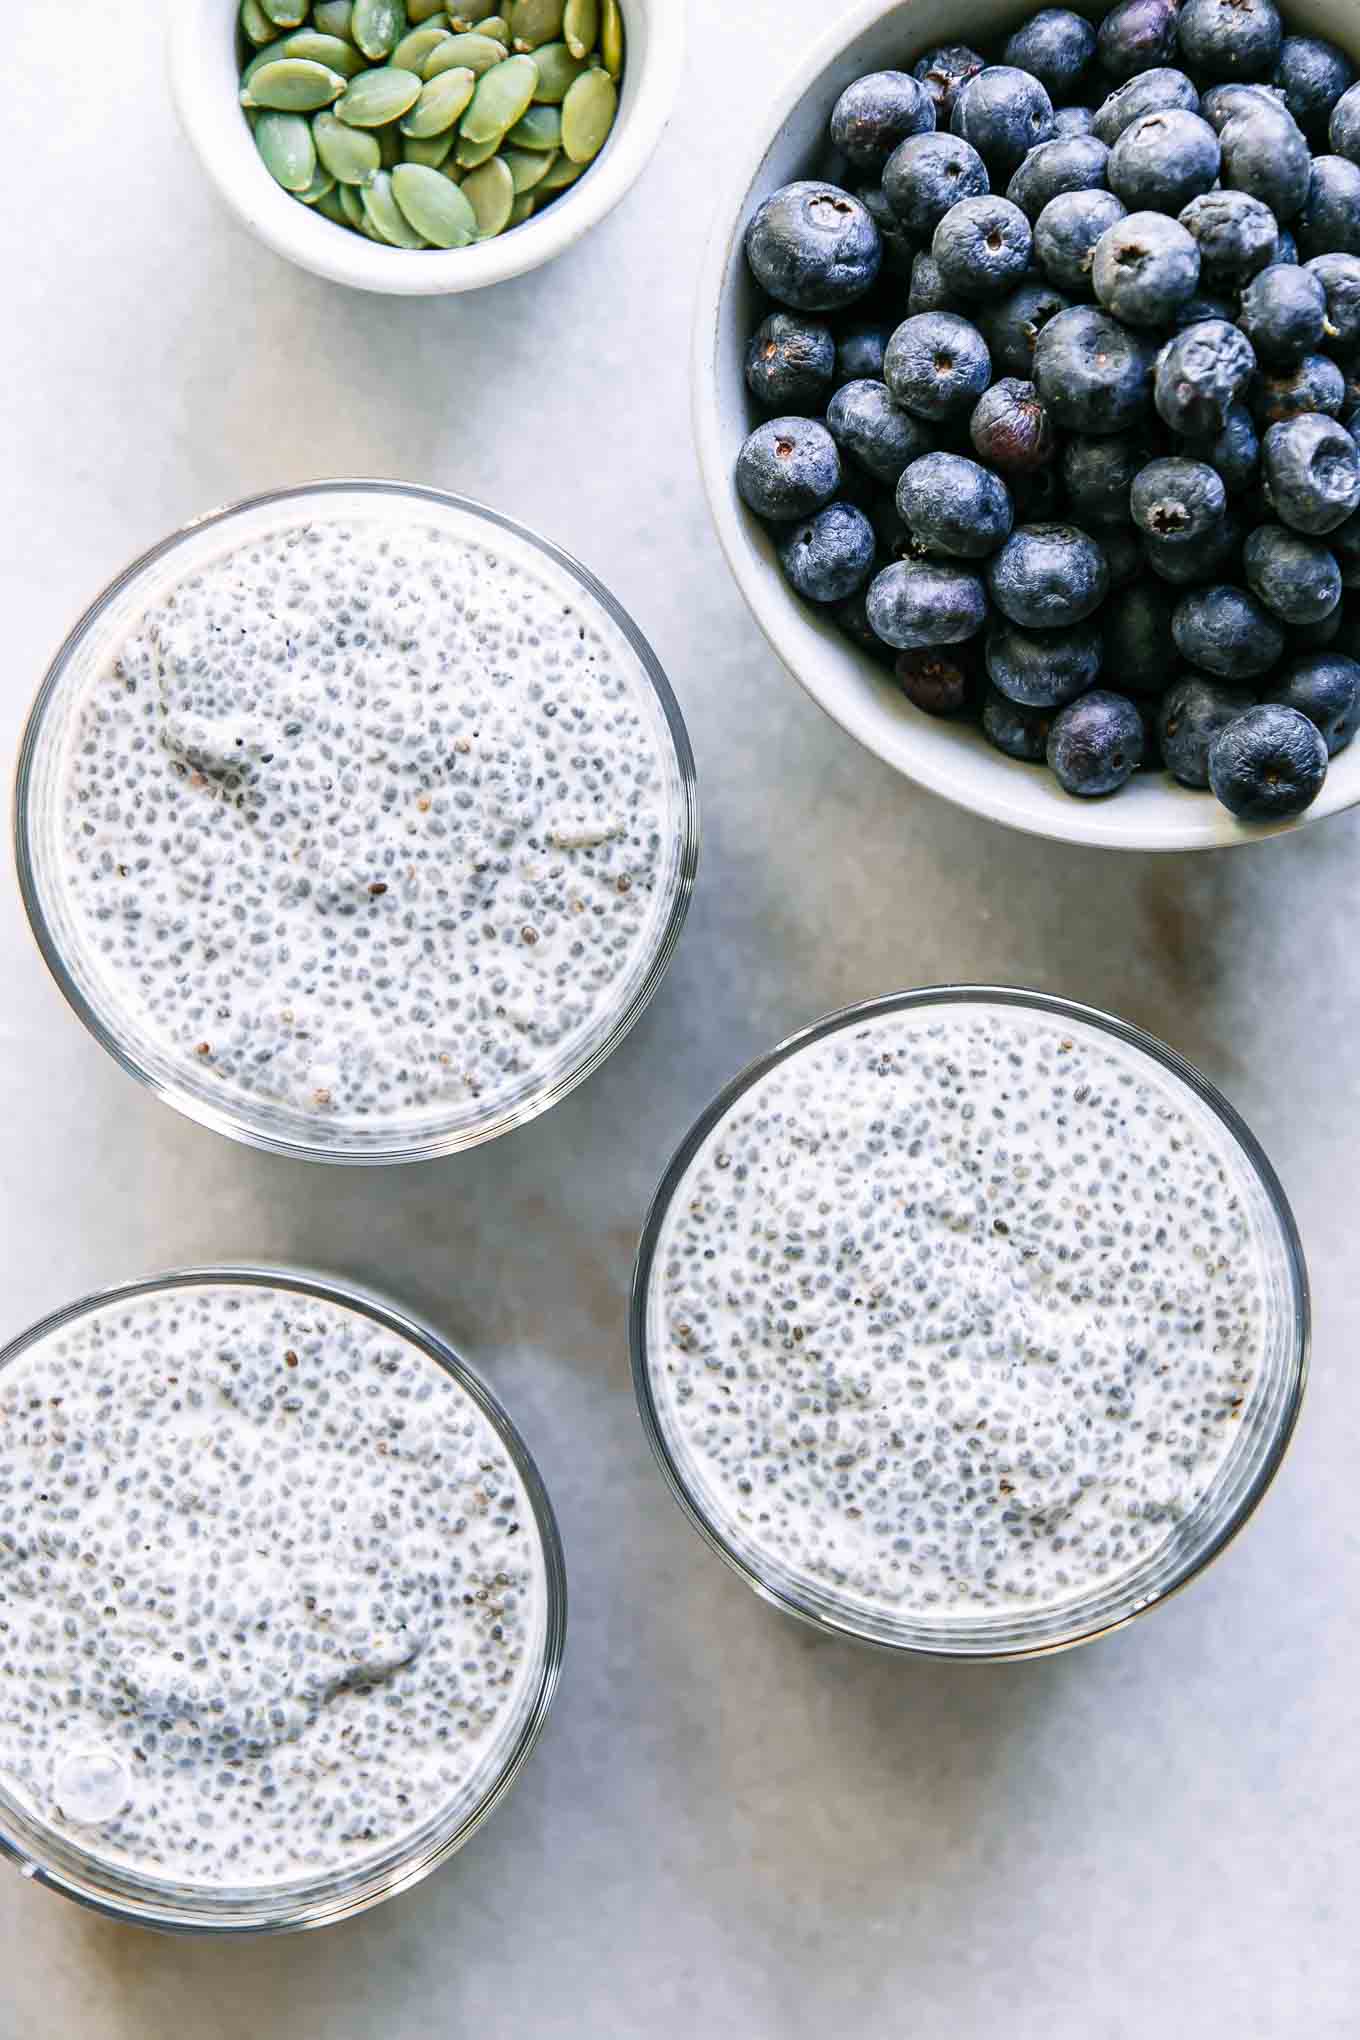 three bowls of chia seed pudding on a white table with a bowl of blueberries